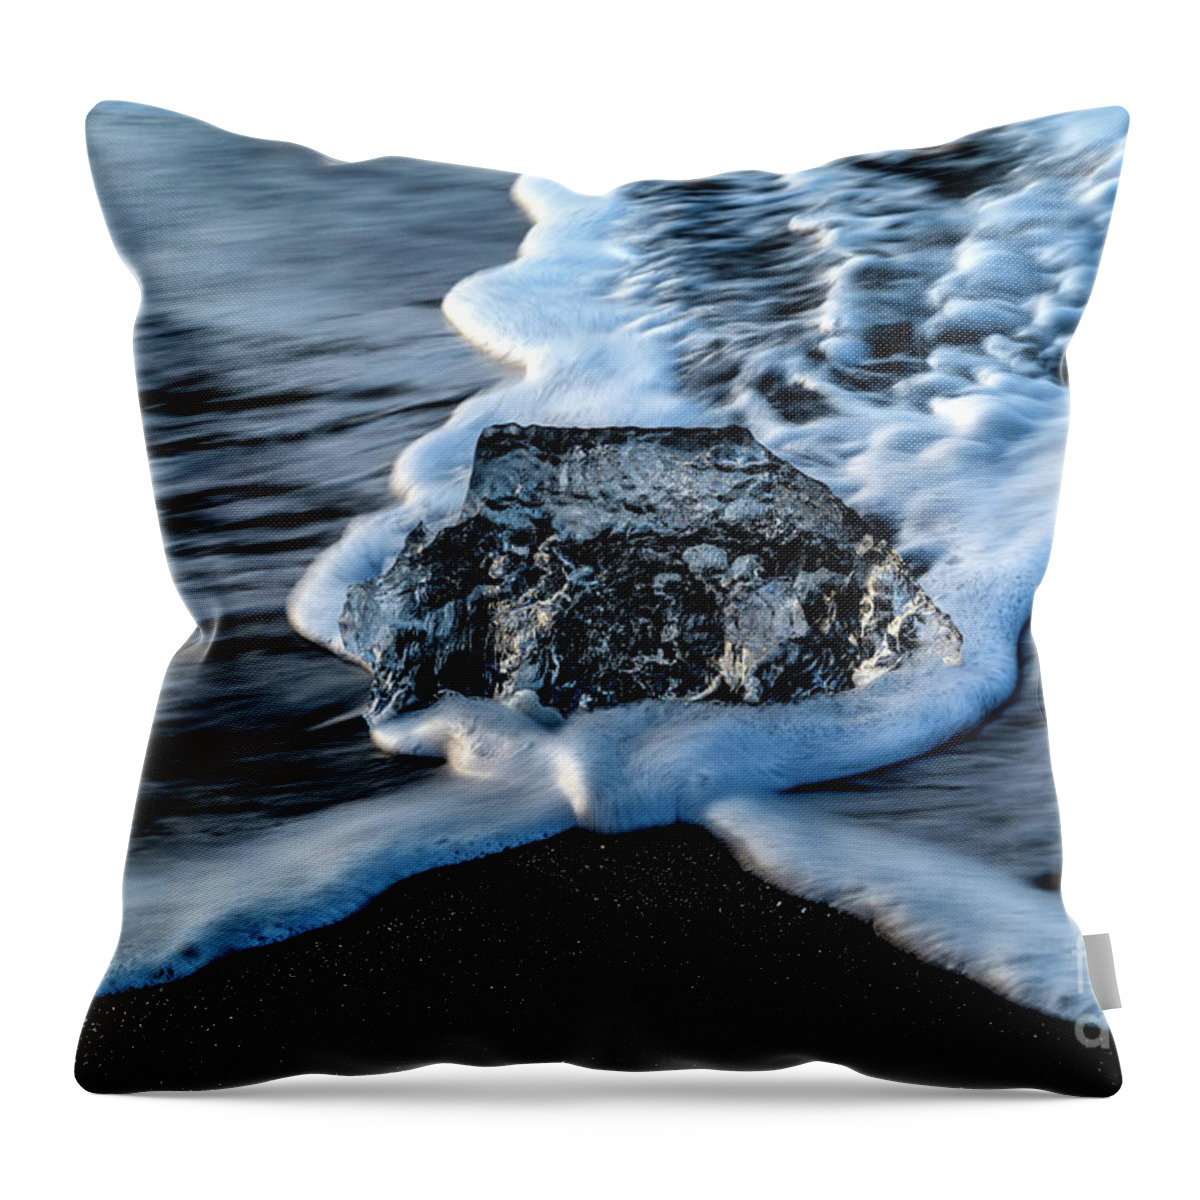 Glacial Beach Ice 3 Throw Pillow featuring the photograph Glacial Beach Ice 3 by M G Whittingham